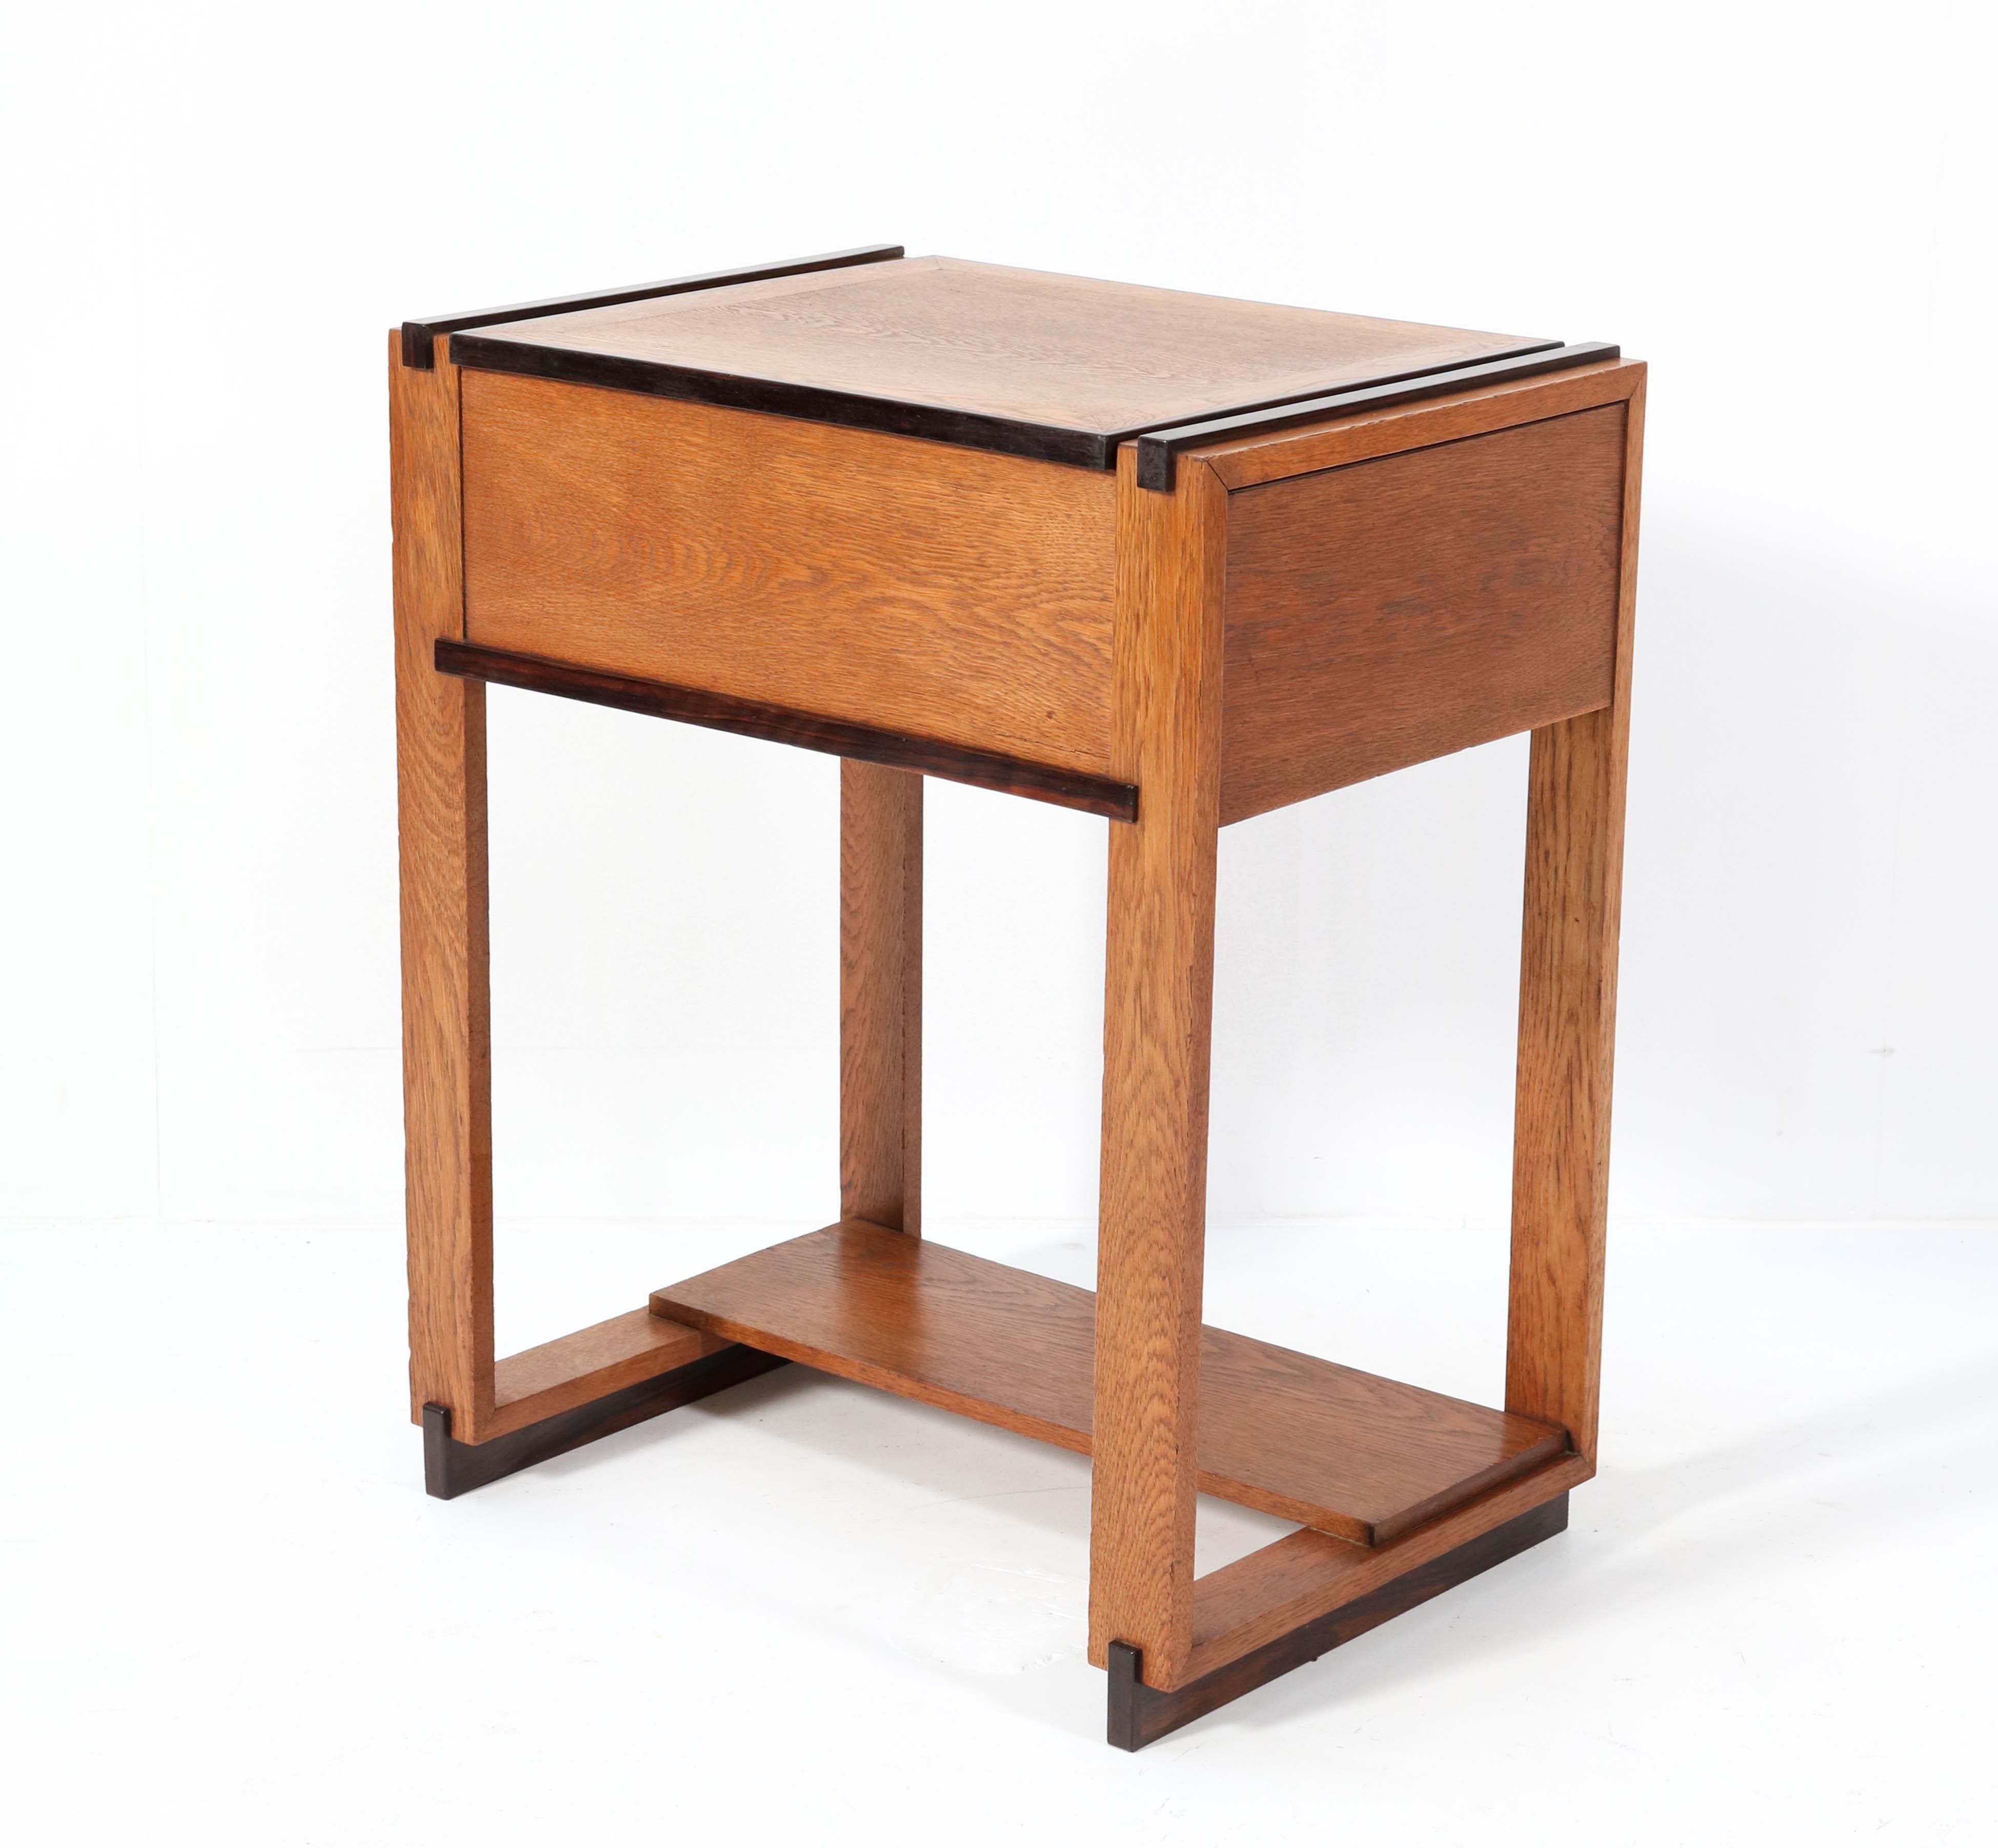 Magnificent and rare Art Deco Haagse School sewing table.
Design by P.E.L. Izeren for Genneper Molen.
Striking Dutch design from the 1920s.
Oak with Macassar ebony lining.
In very good condition with a beautiful patina.
   